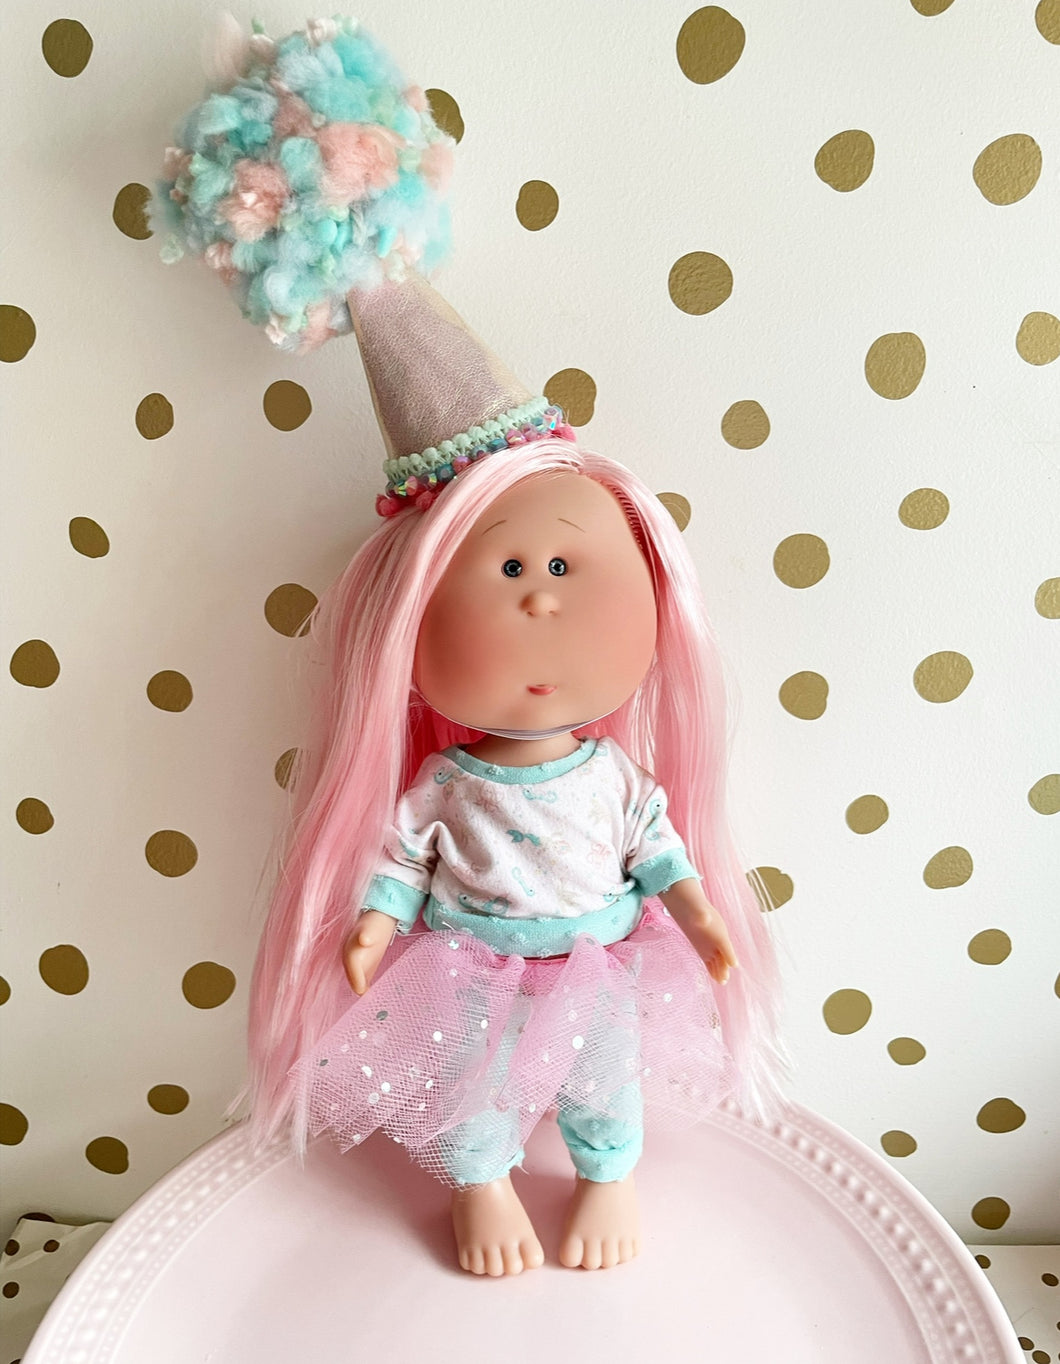 Live Sweet Doll outfit of the month Subscription